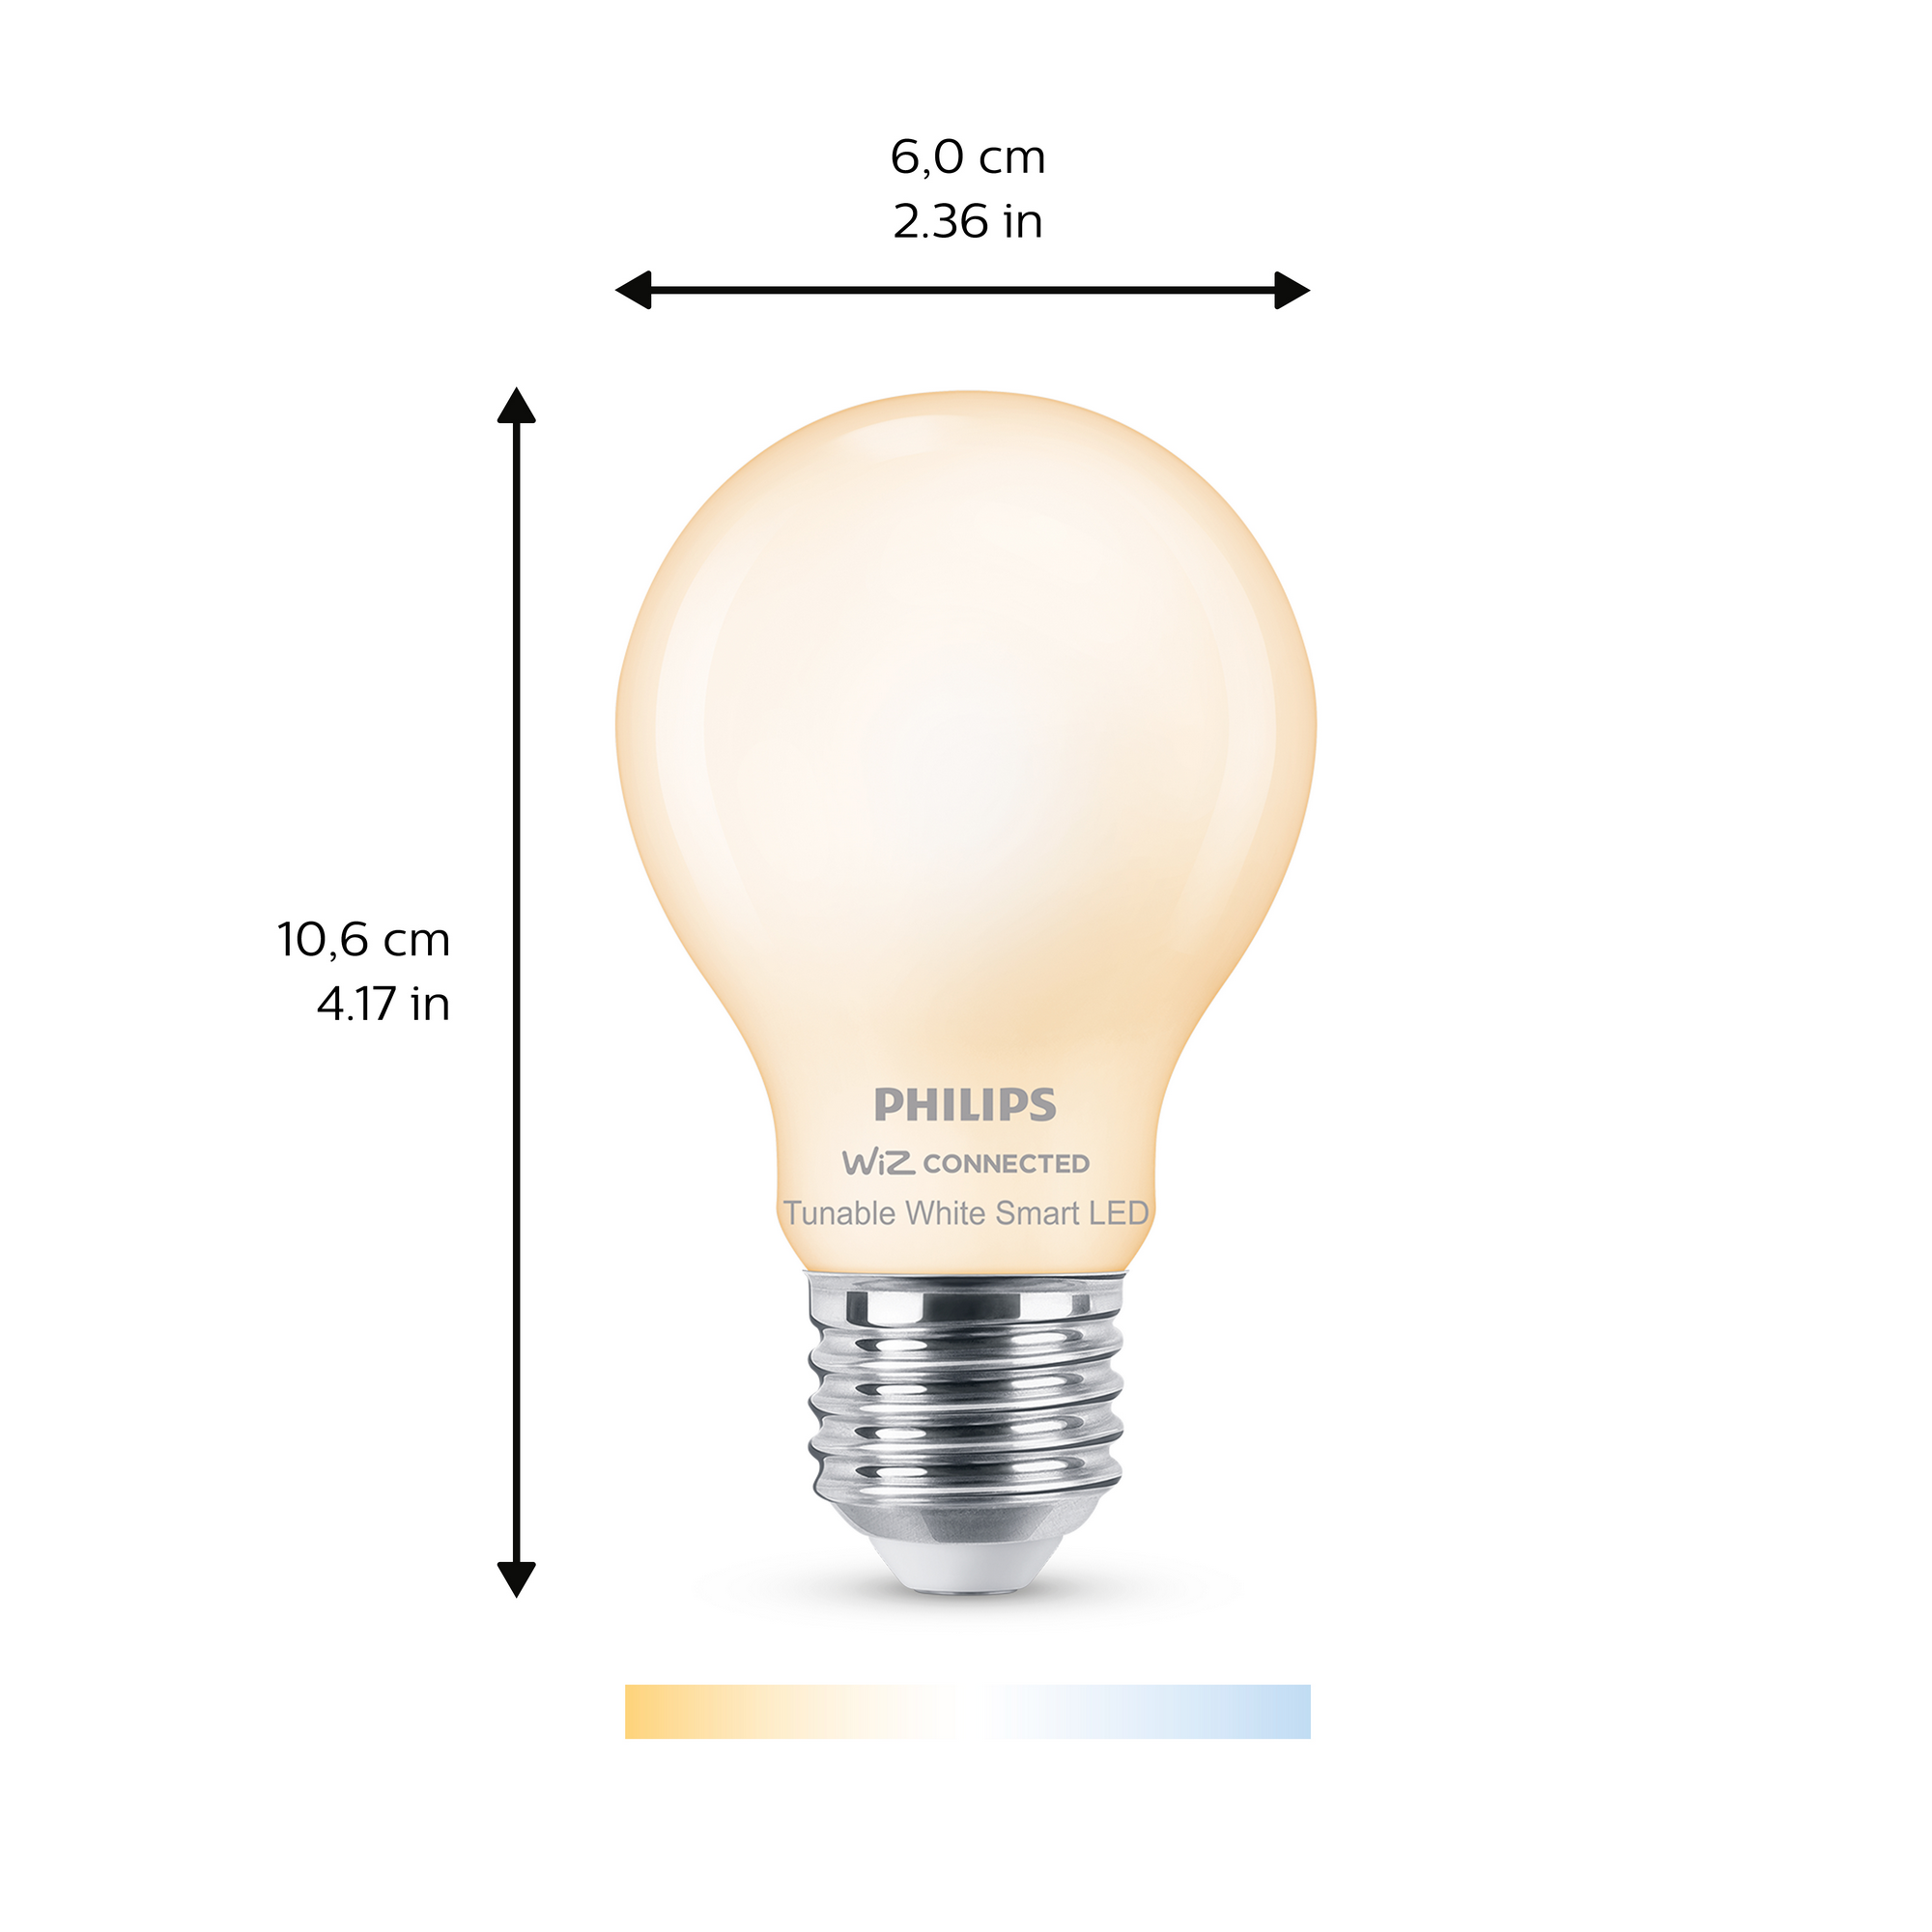 LED-Lampe 'SmartLED' 806 lm E27 Glühlampe weiß 2700-6500 K 7 W + product picture